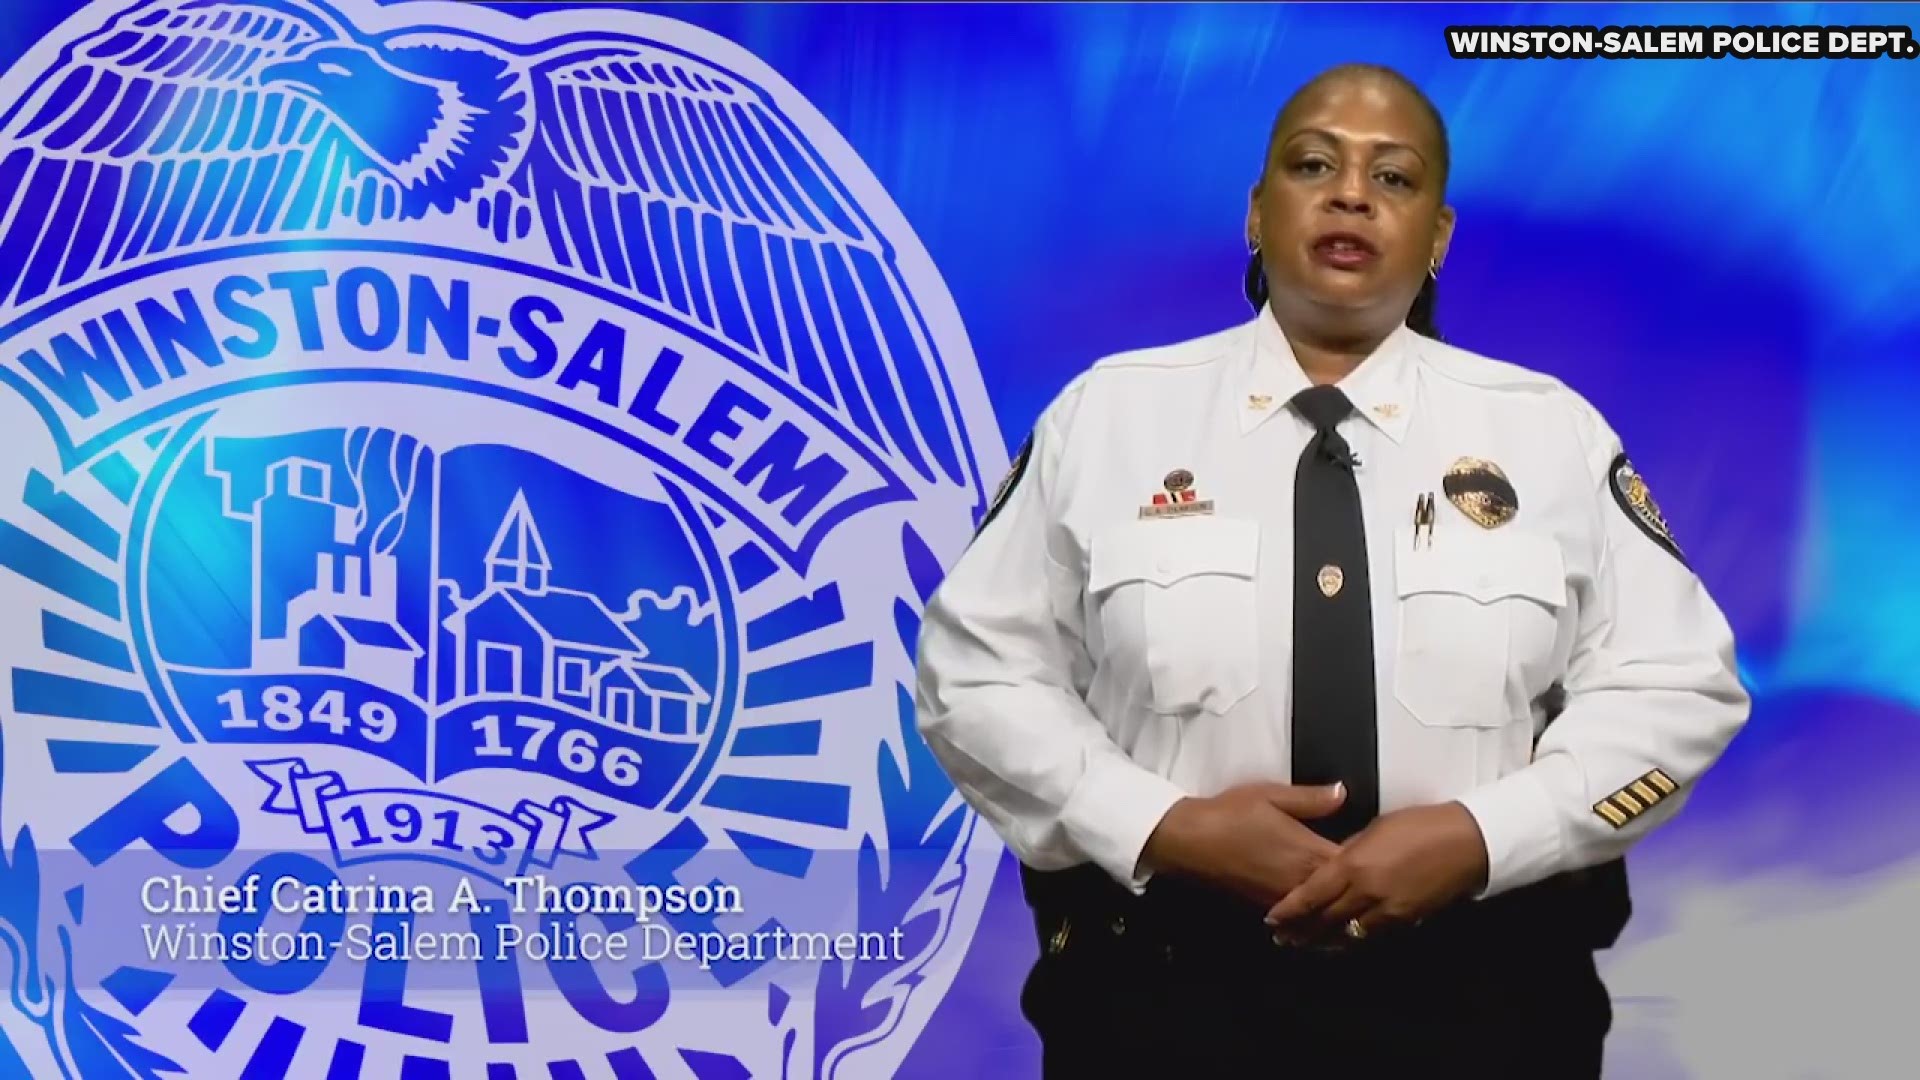 Winston-Salem Police have released video from a March 30, deadly officer-involved shooting following a traffic stop. Portions of the video are graphic and include hearing gunshots, yelling, and explicit language. The City of Winston-Salem has blurred the